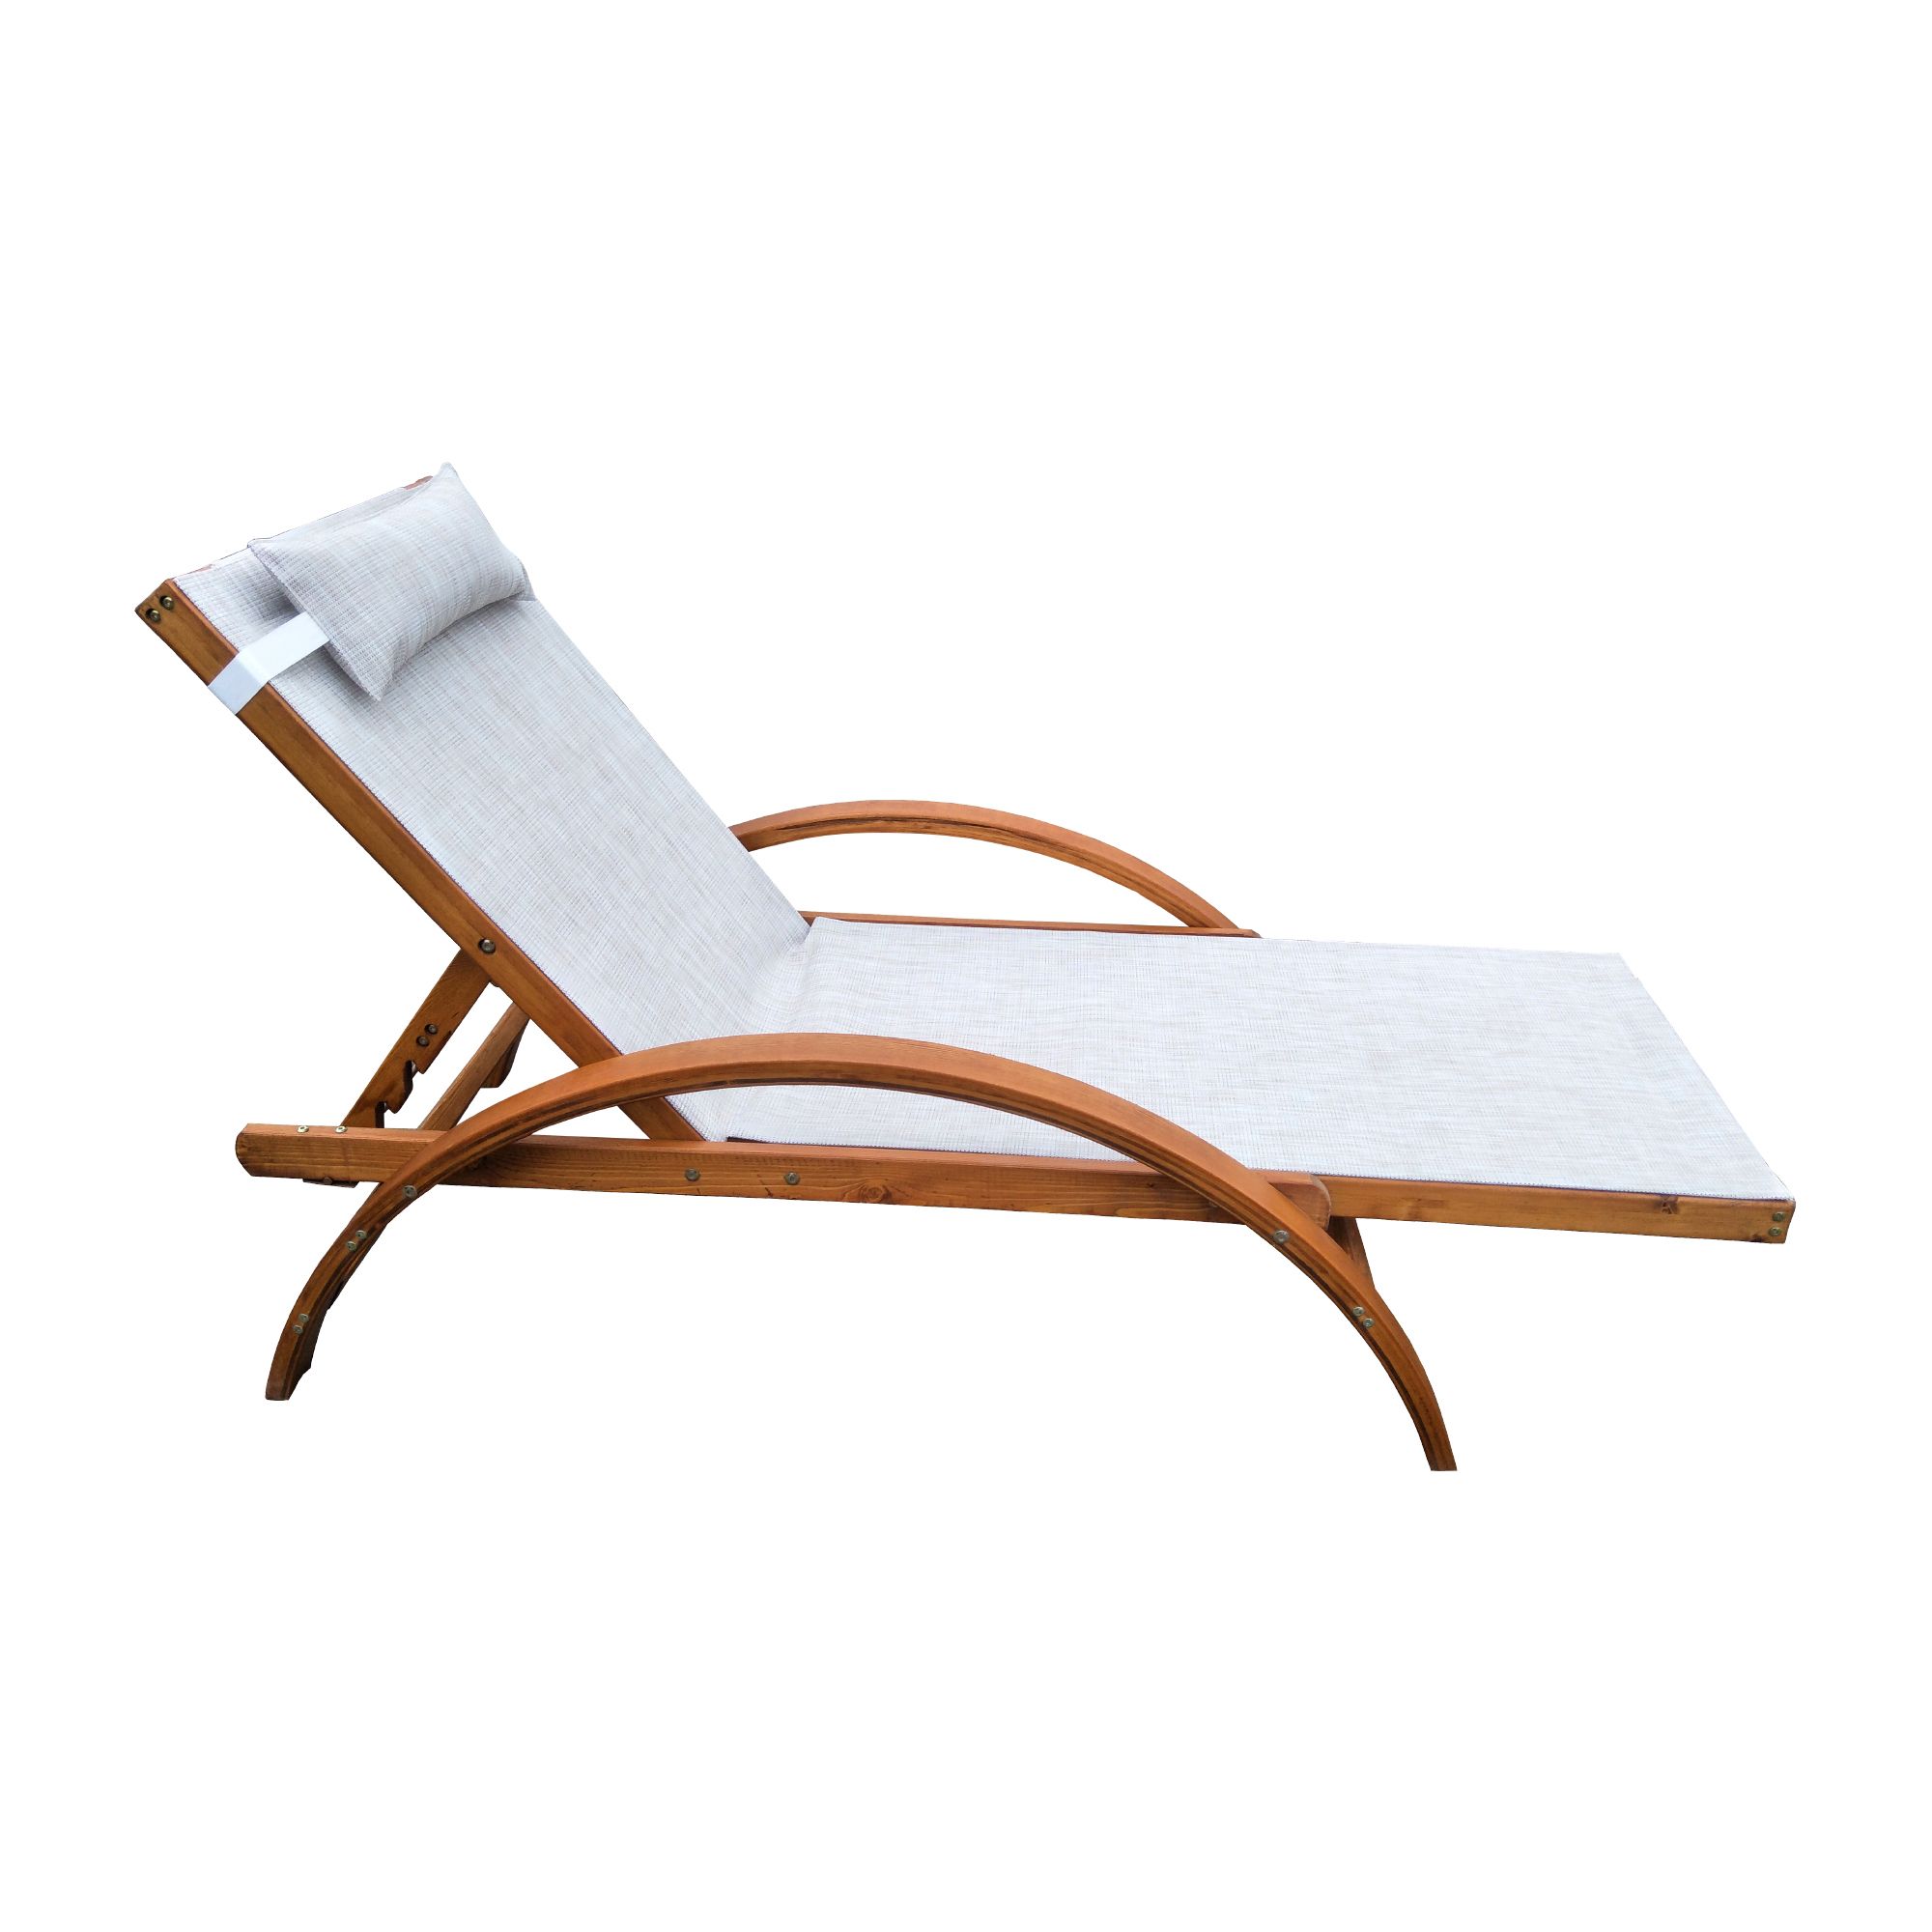 Reclining Sling Lounge Chairs With Fashionable Leisure Season Ltd – Reclining Sling Lounge Chair (View 14 of 25)